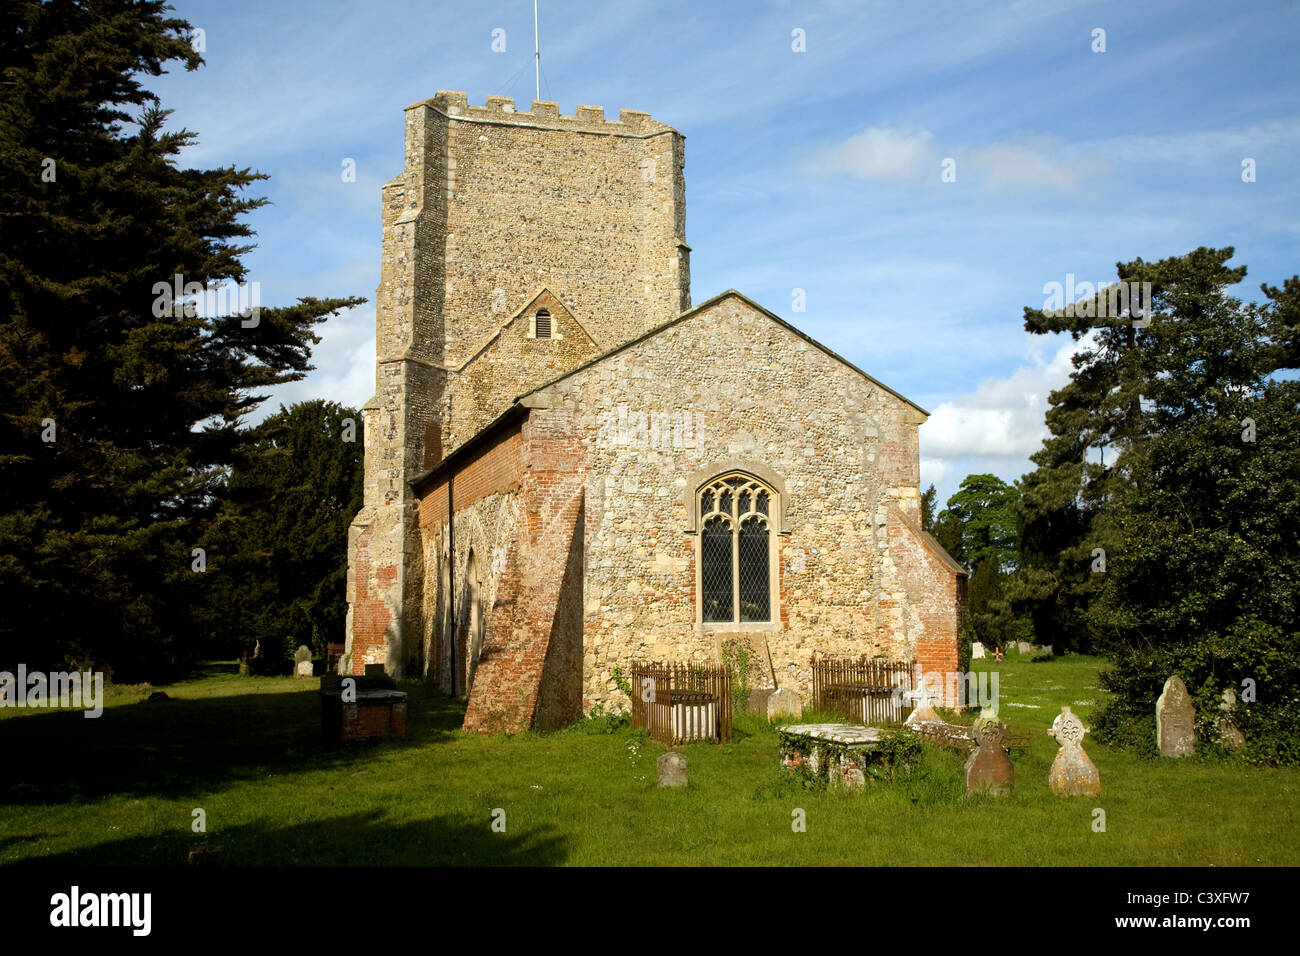 Church of St Mary the large tower dating form the medieval period when the church was much larger, Bawdsey, Suffolk, England Stock Photo